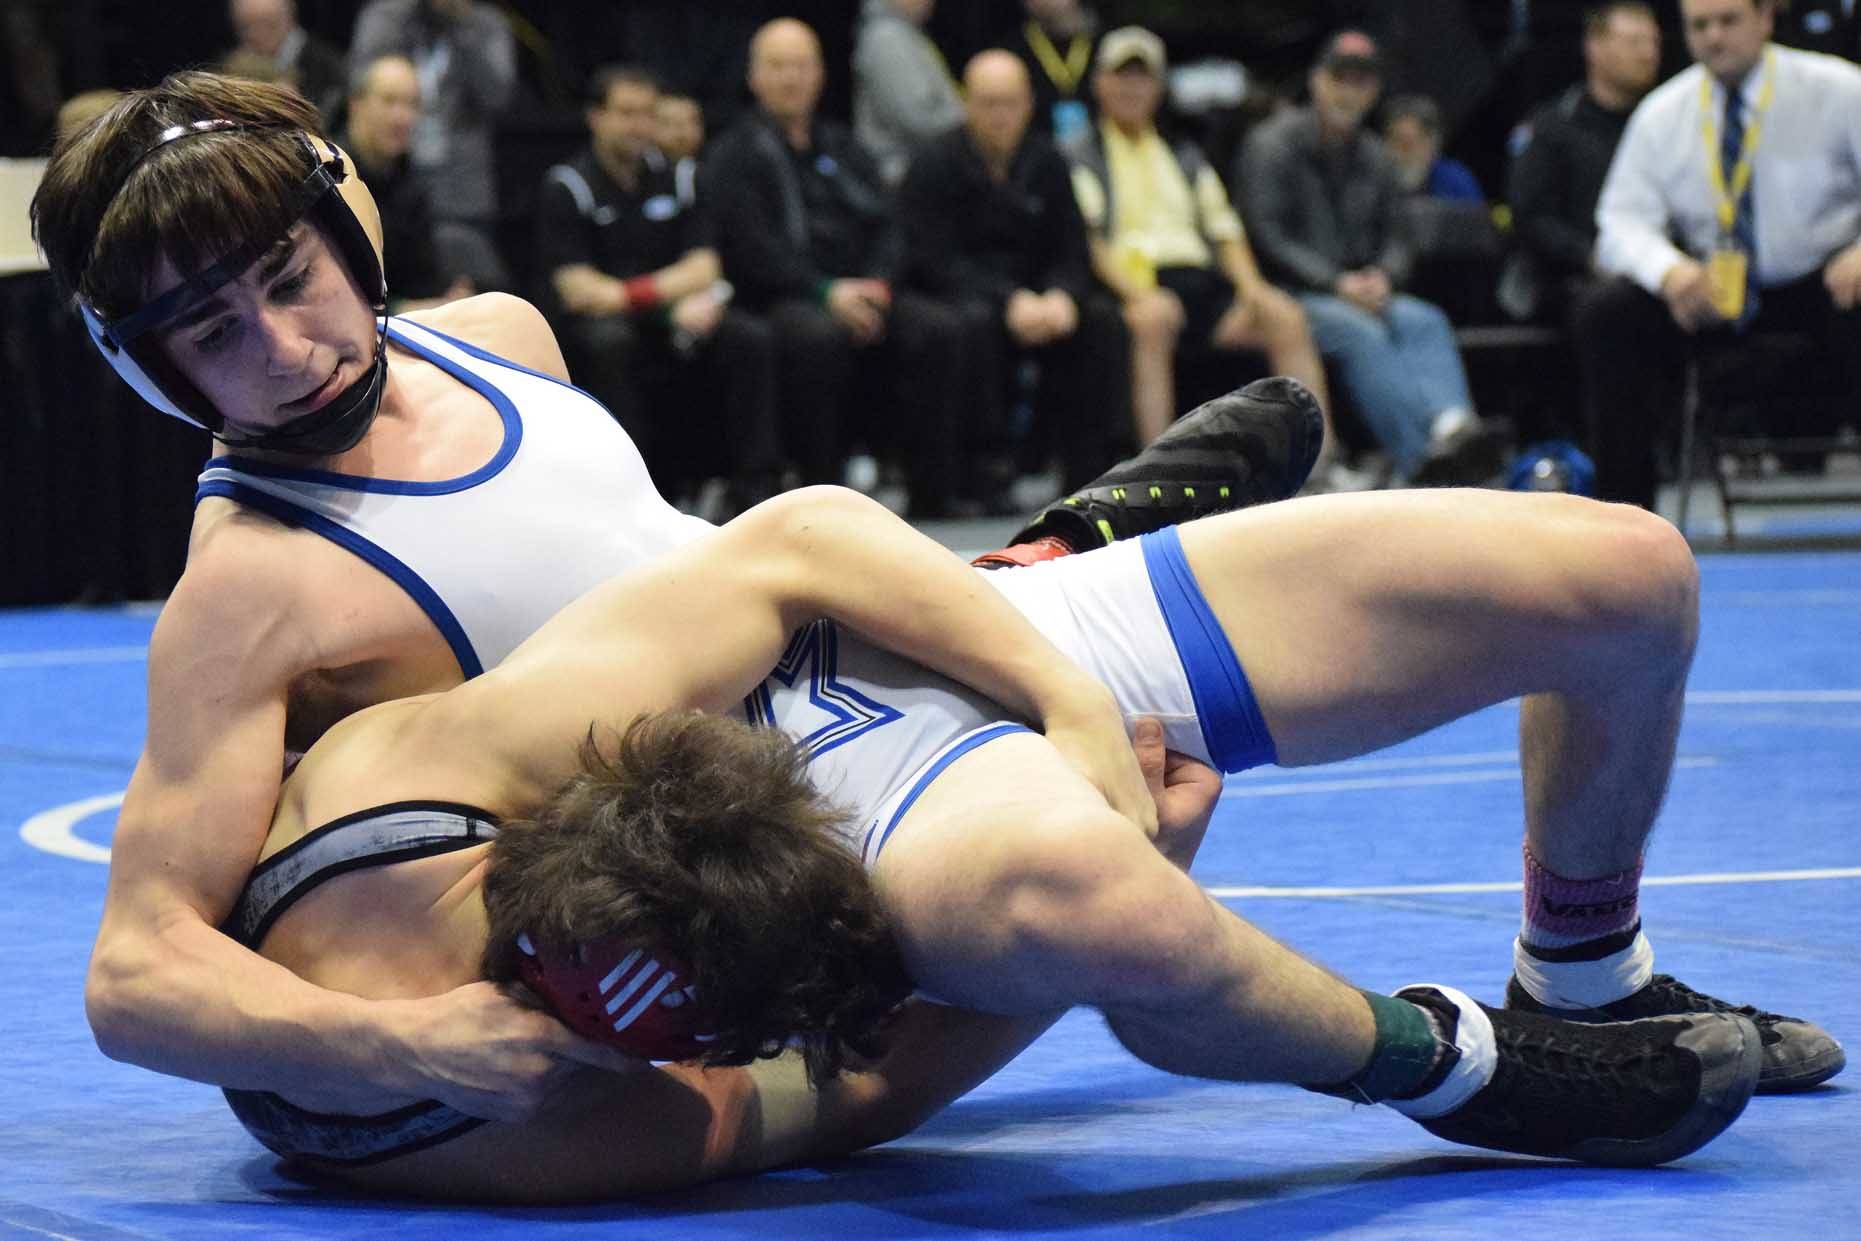 Changes coming to prep wrestling season